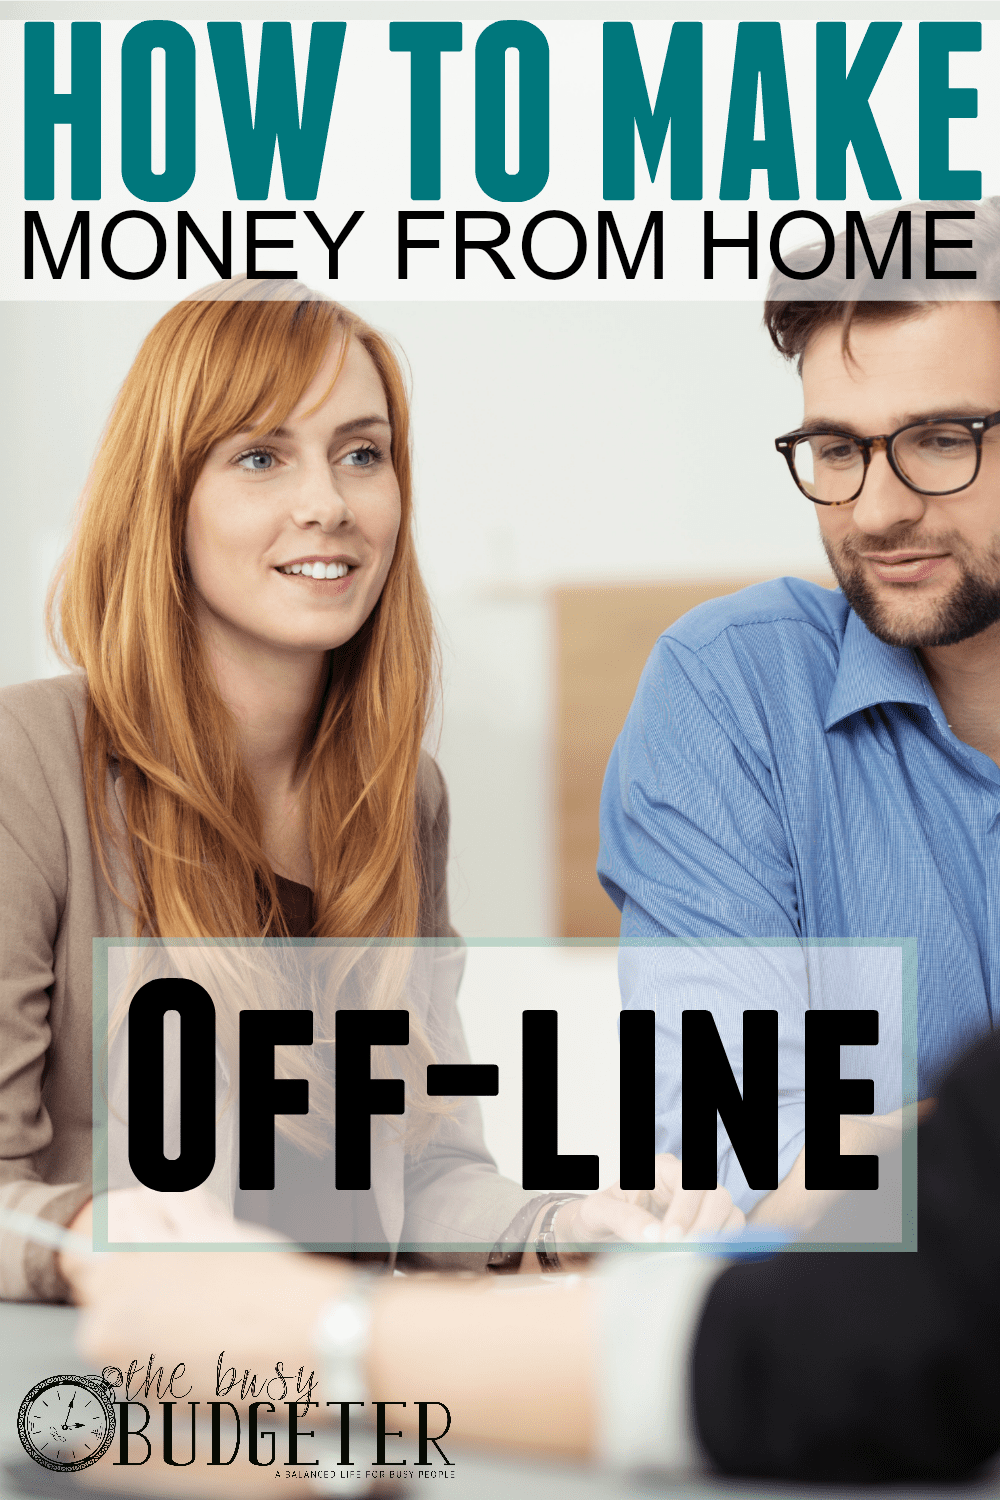 HOW TO MAKE MONEY FROM HOME OFFLINE. I really want to quit my job. But I feel like everyone's making money working online. I love the advice for starting an offline real business. I have an MLM business right now that I would love to apply this too! I'm always looking for MLM tips and tricks